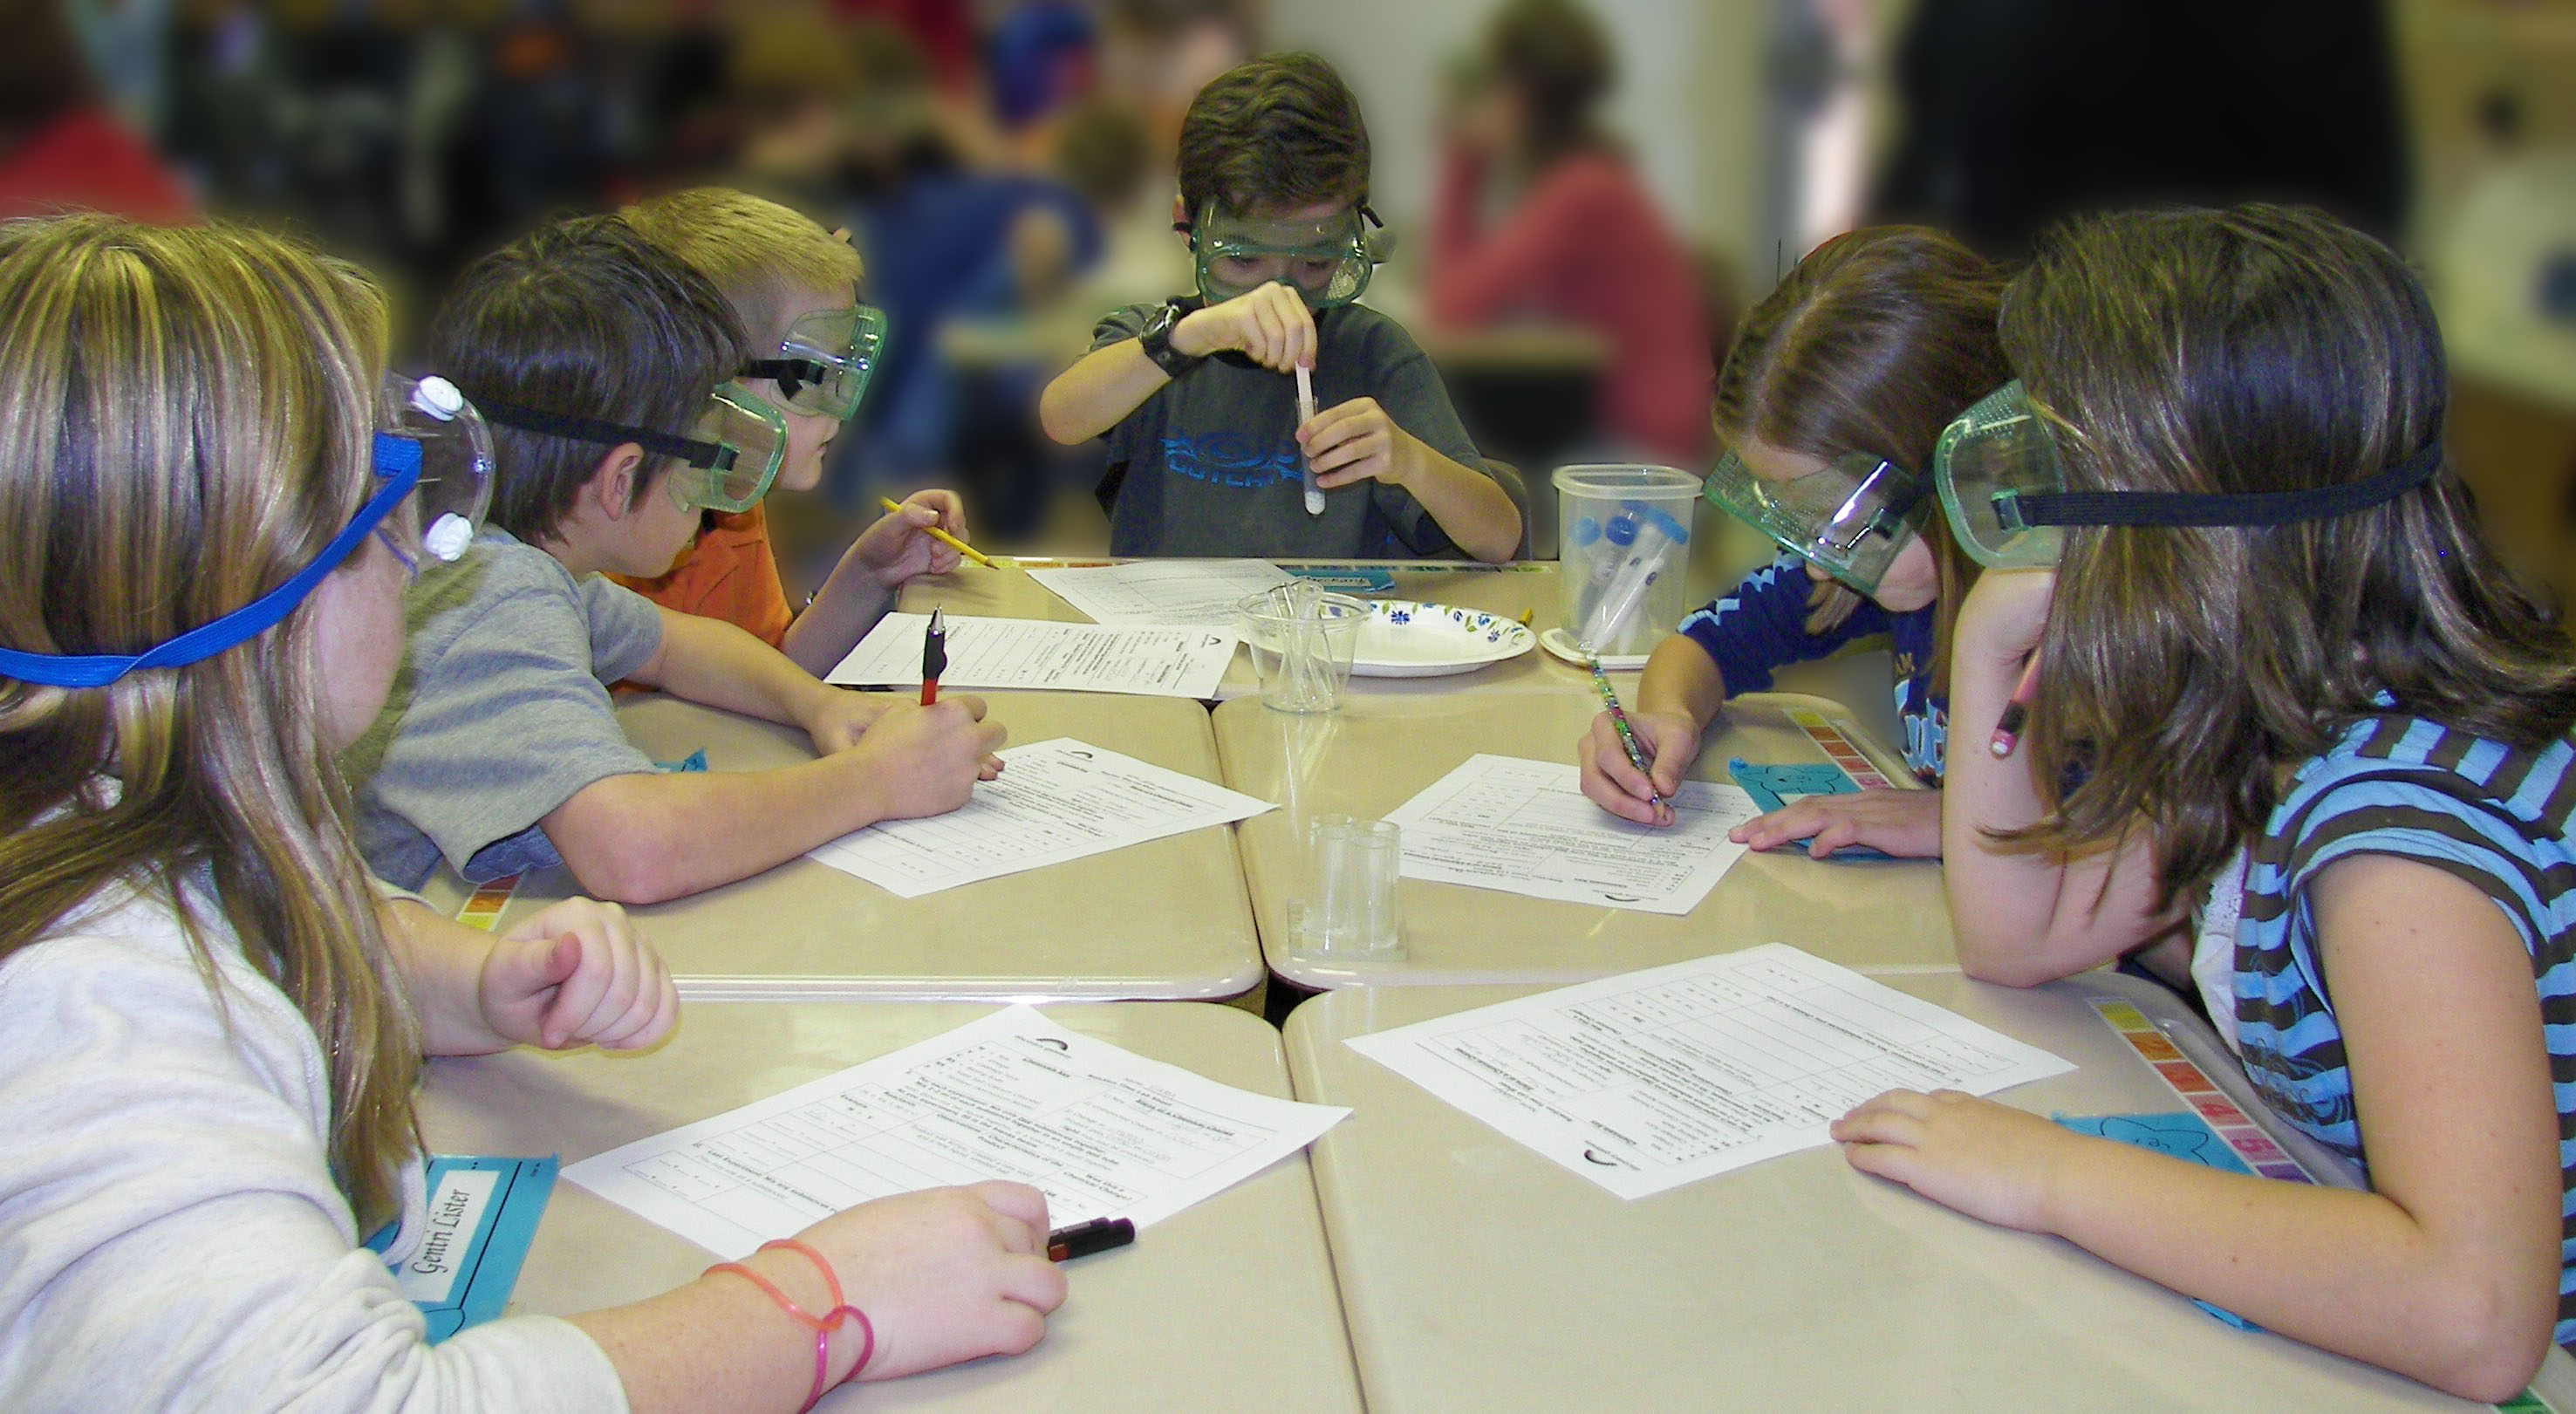 Kids experimenting with test tubes.